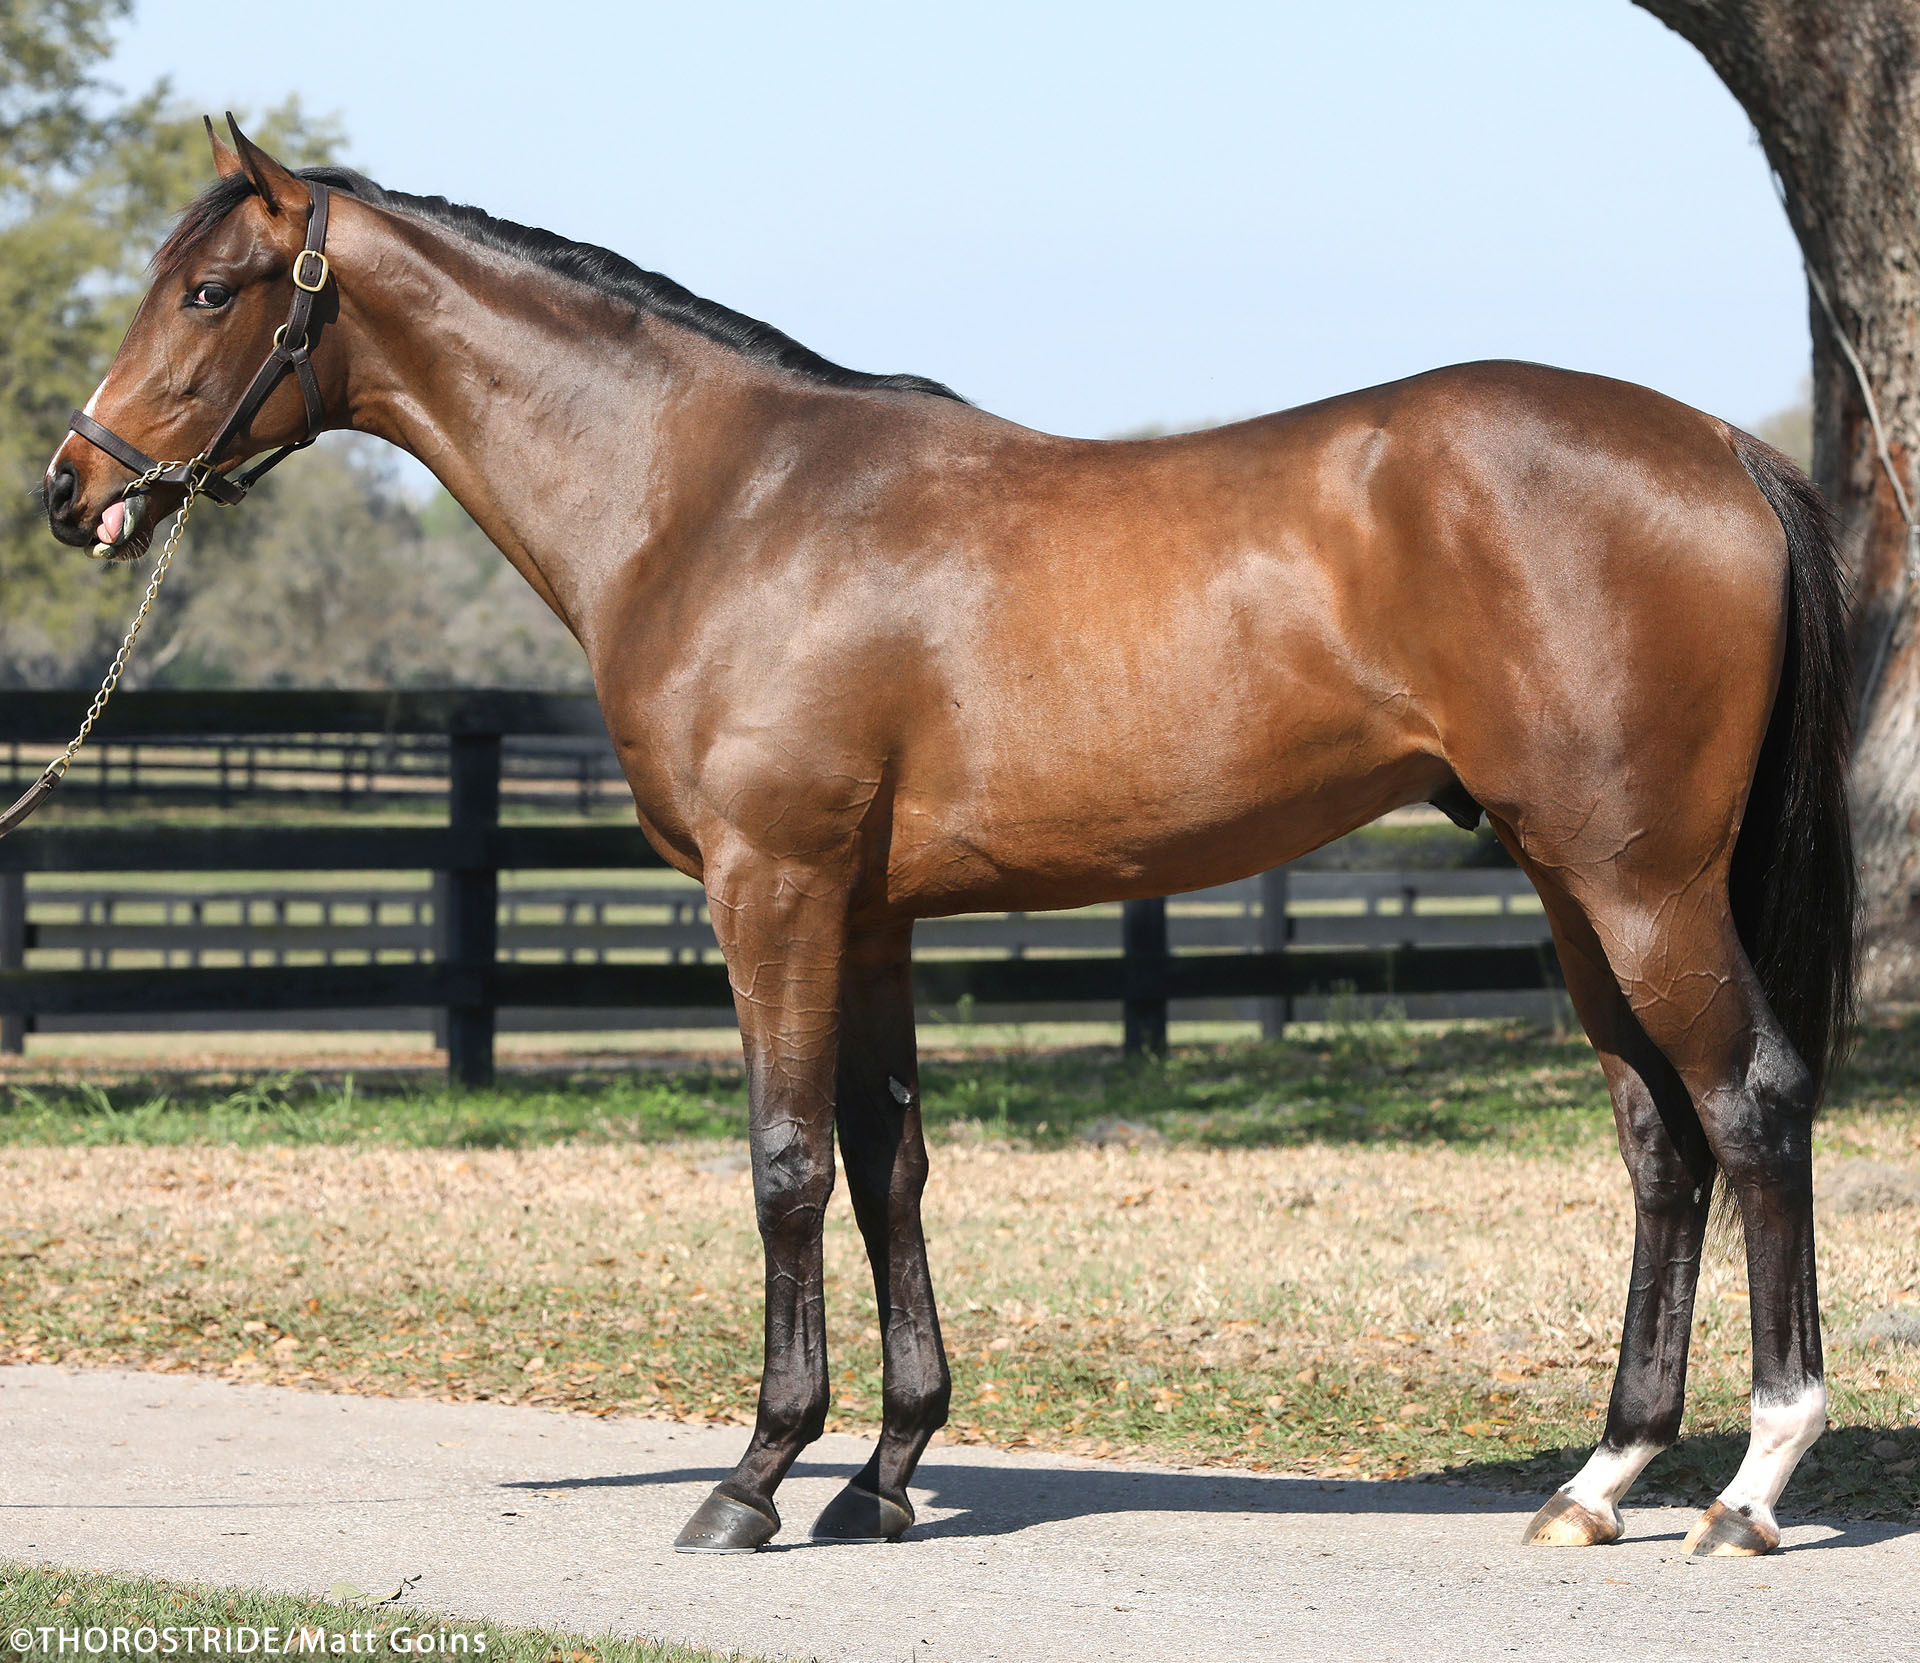 Liam's Map colt out of the multiple winner and stakes producing A. P. Indy mare Star Torina. Purchased at the OBS March Sale and available as part of the Twin Oaks LLC thoroughbred racing partnership.